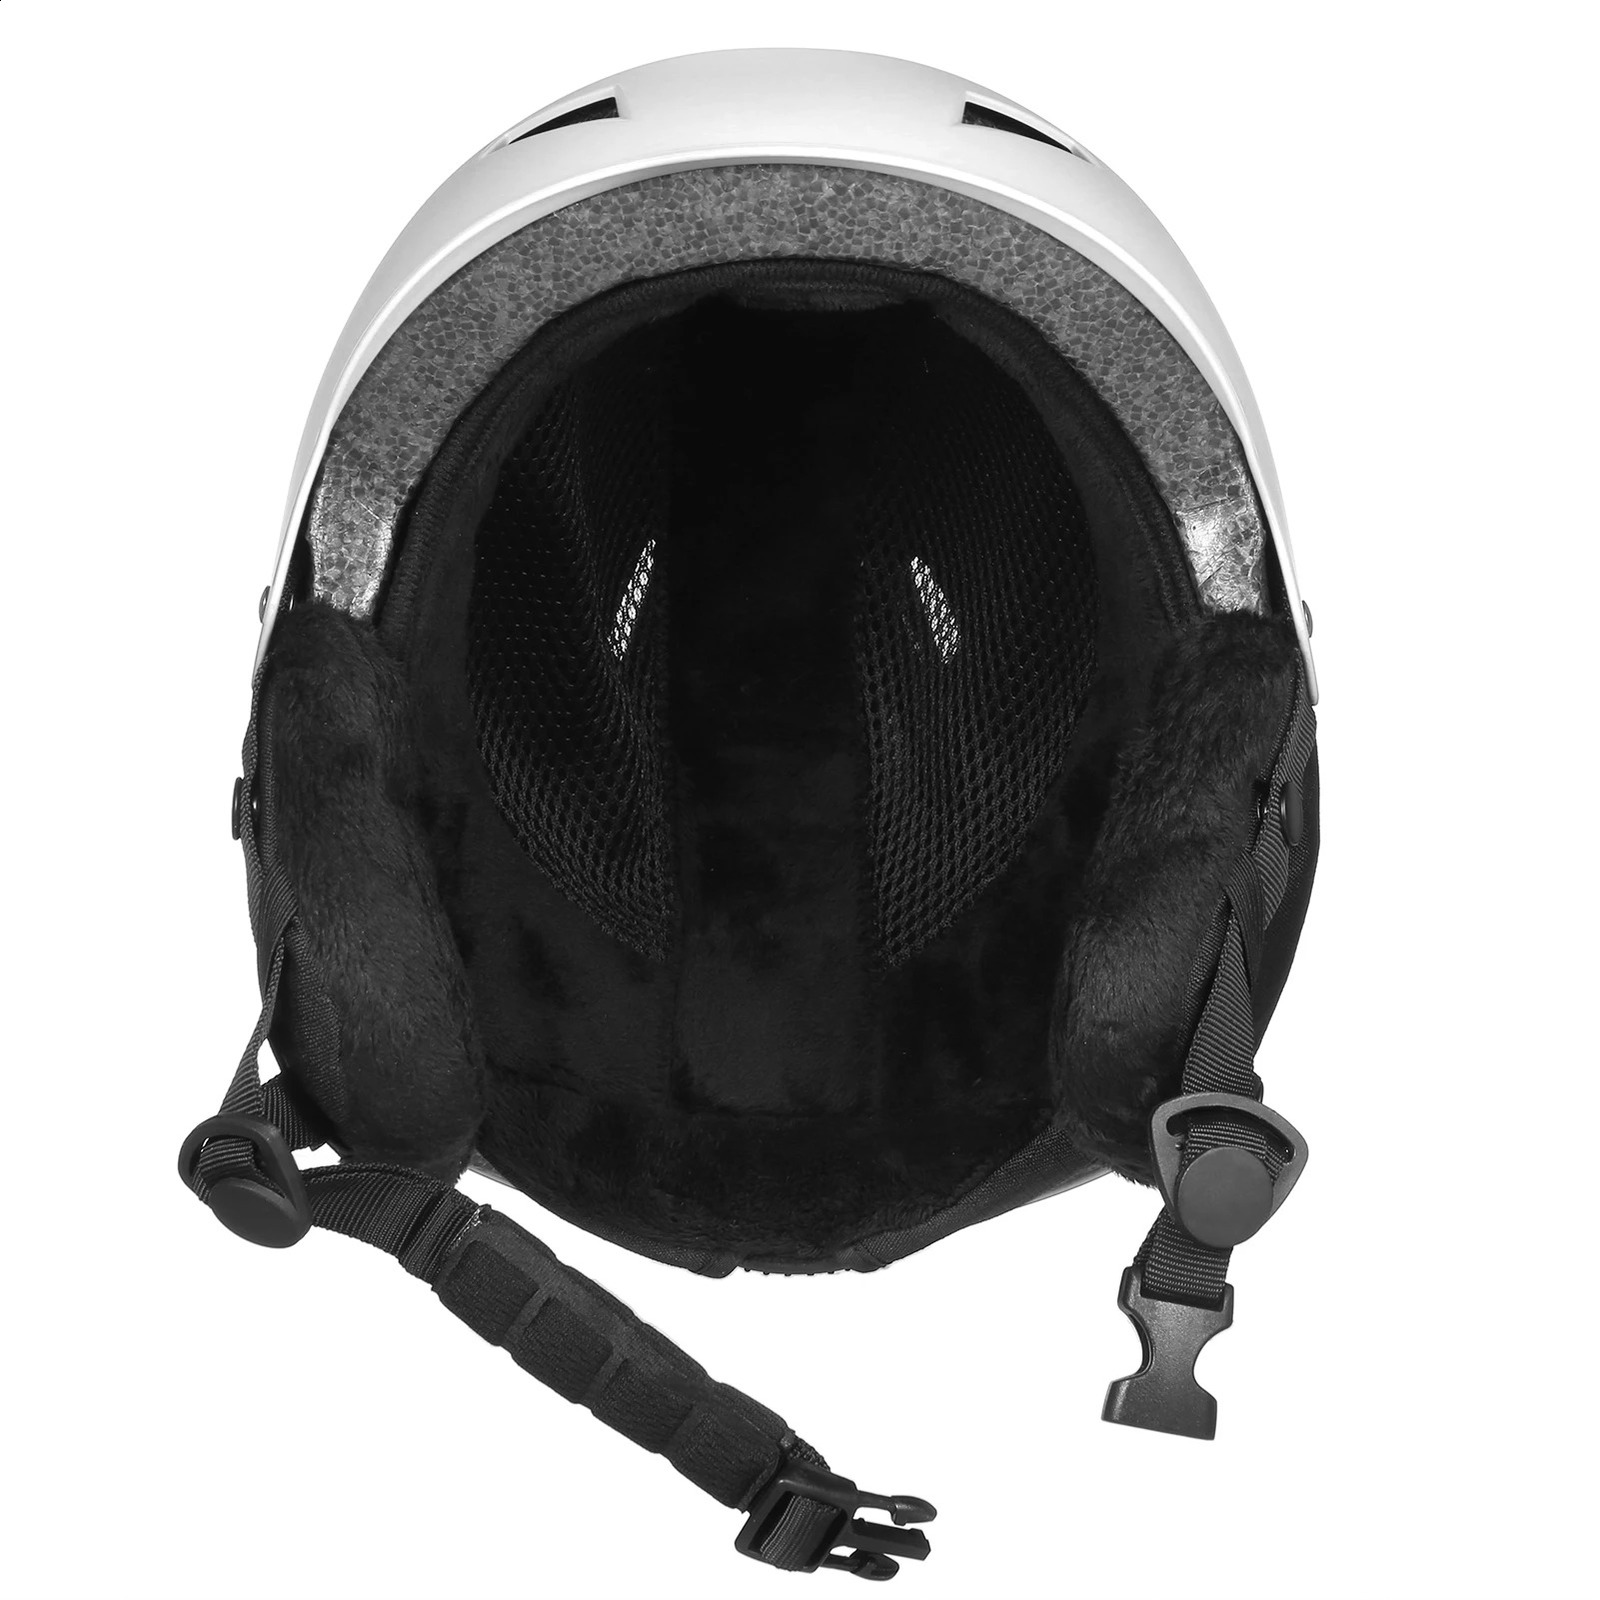 Snow Helmet with Detachable Earmuff Men Women Snowboard Goggle Fixed Strap Safety Skiing Sports 240124